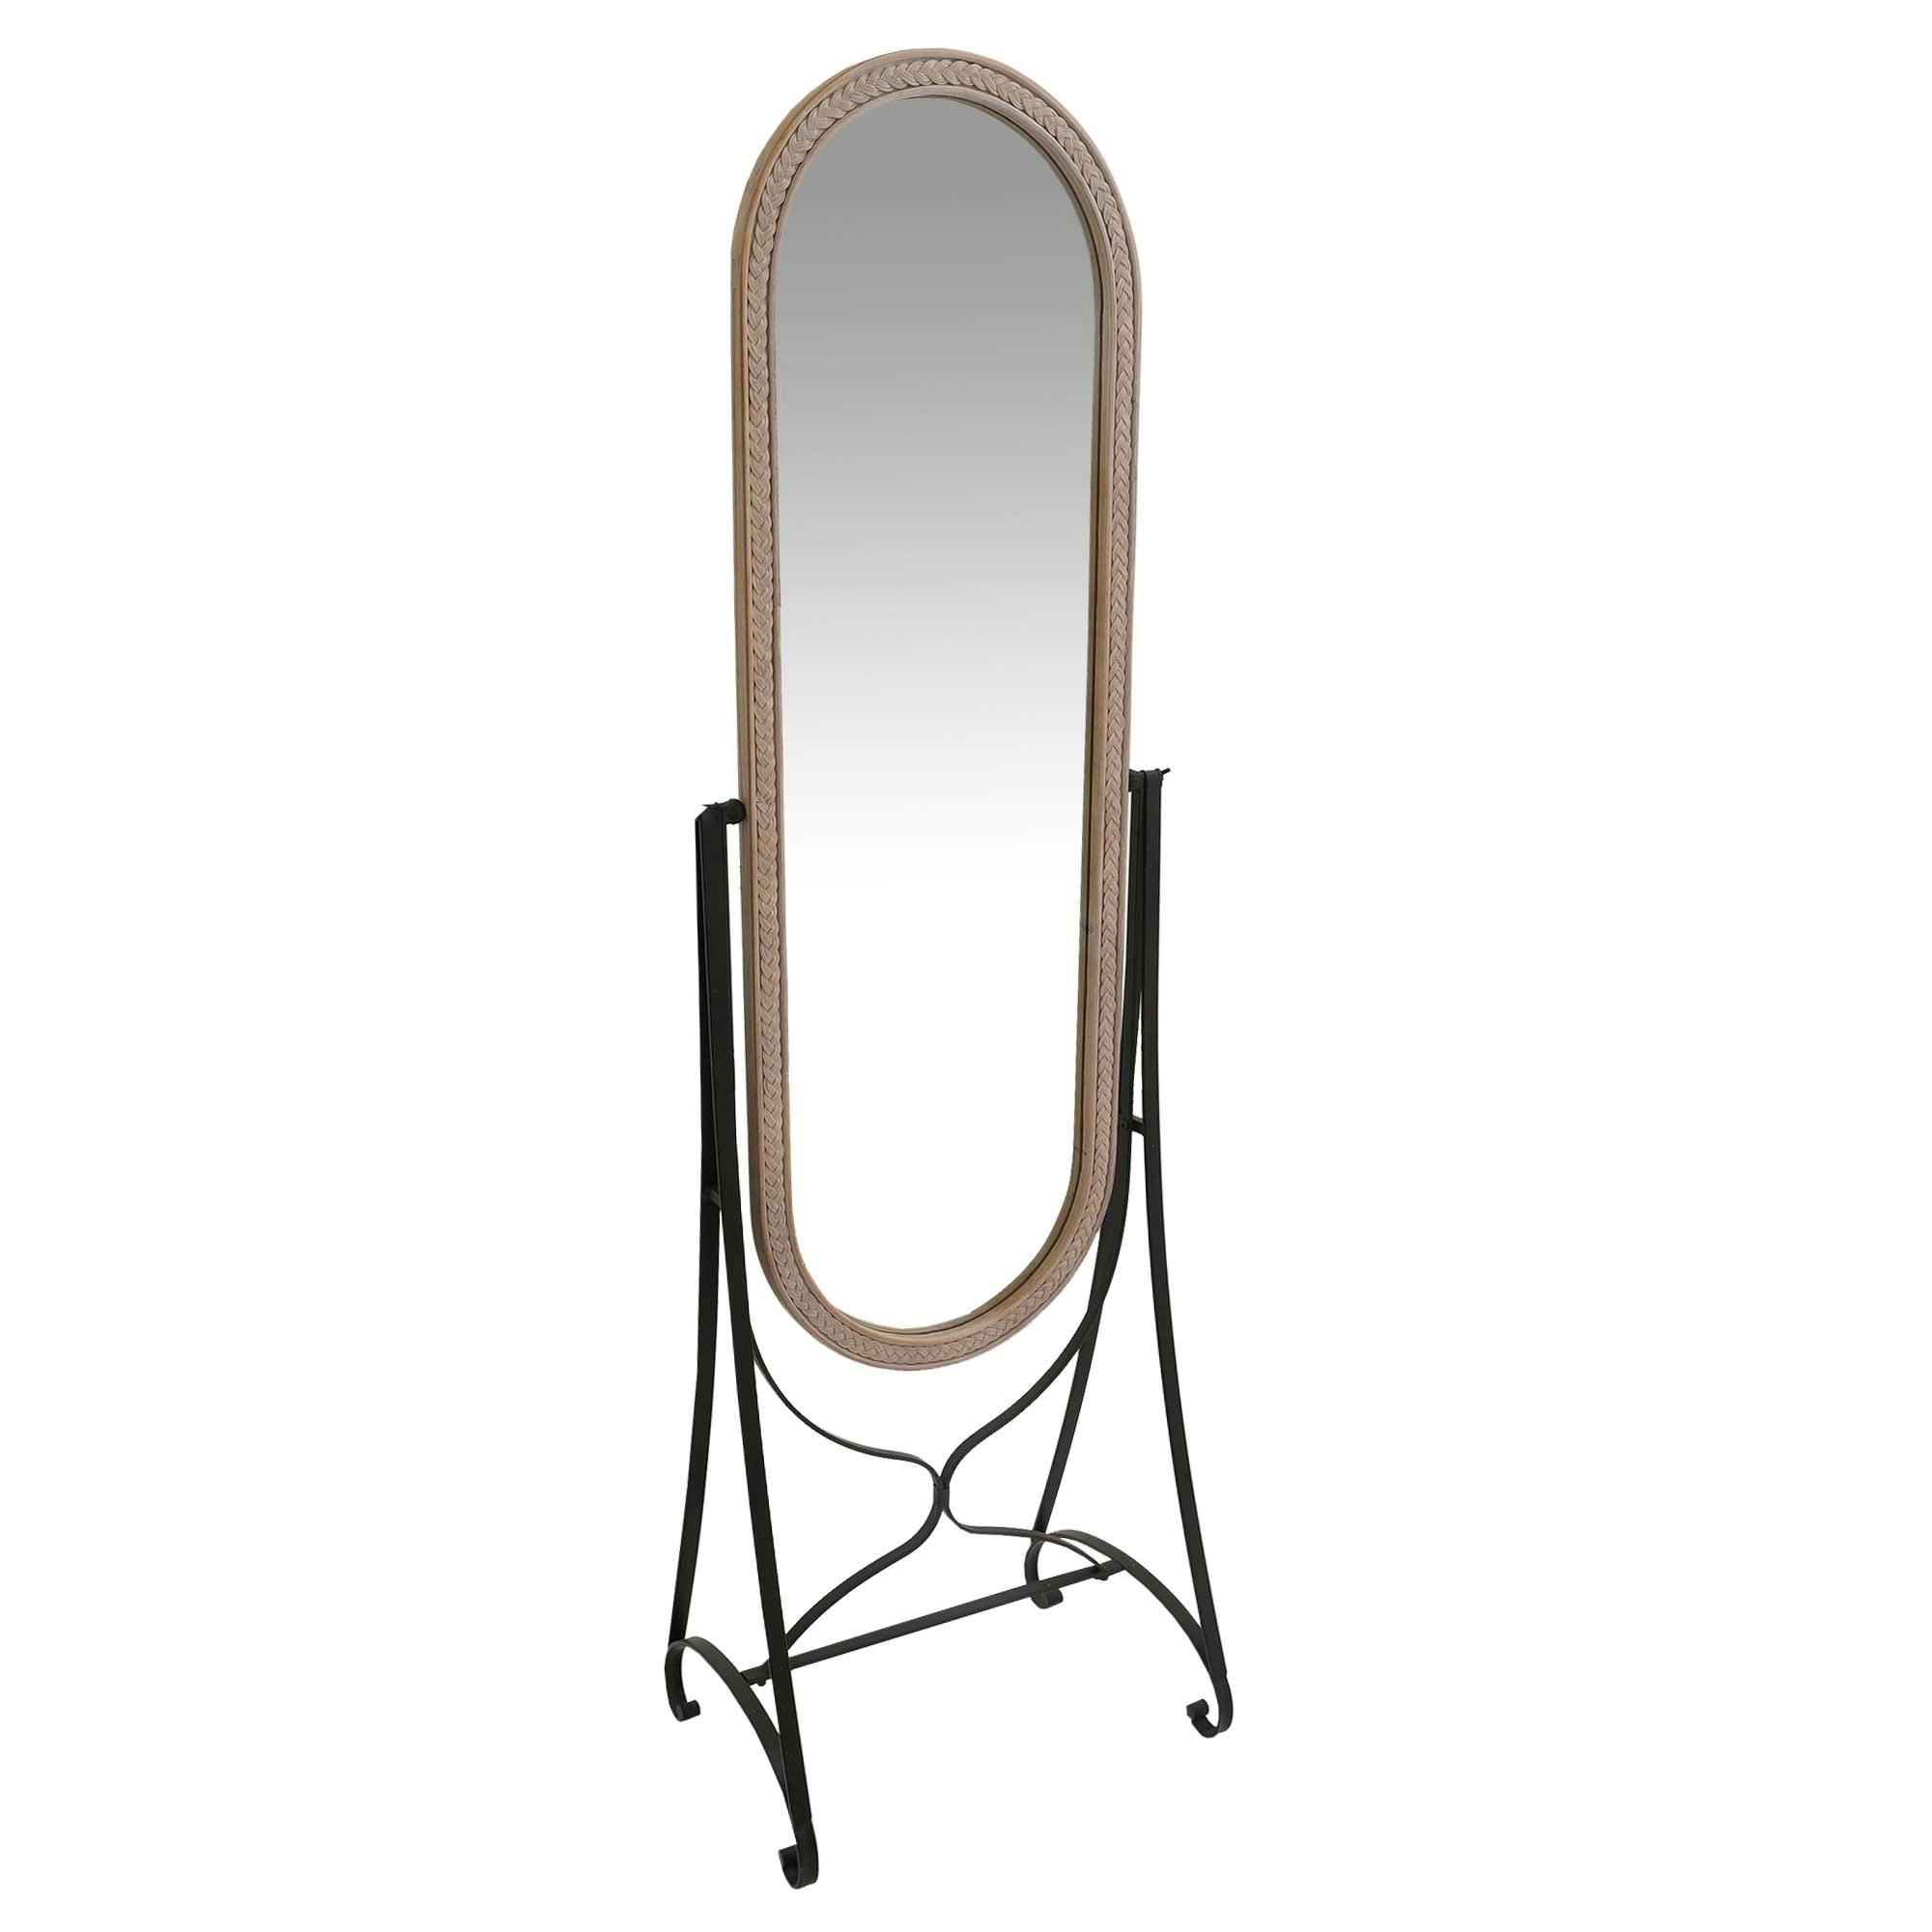 Elegant Full-Length Oval Wood Freestanding Mirror with Carved Detail